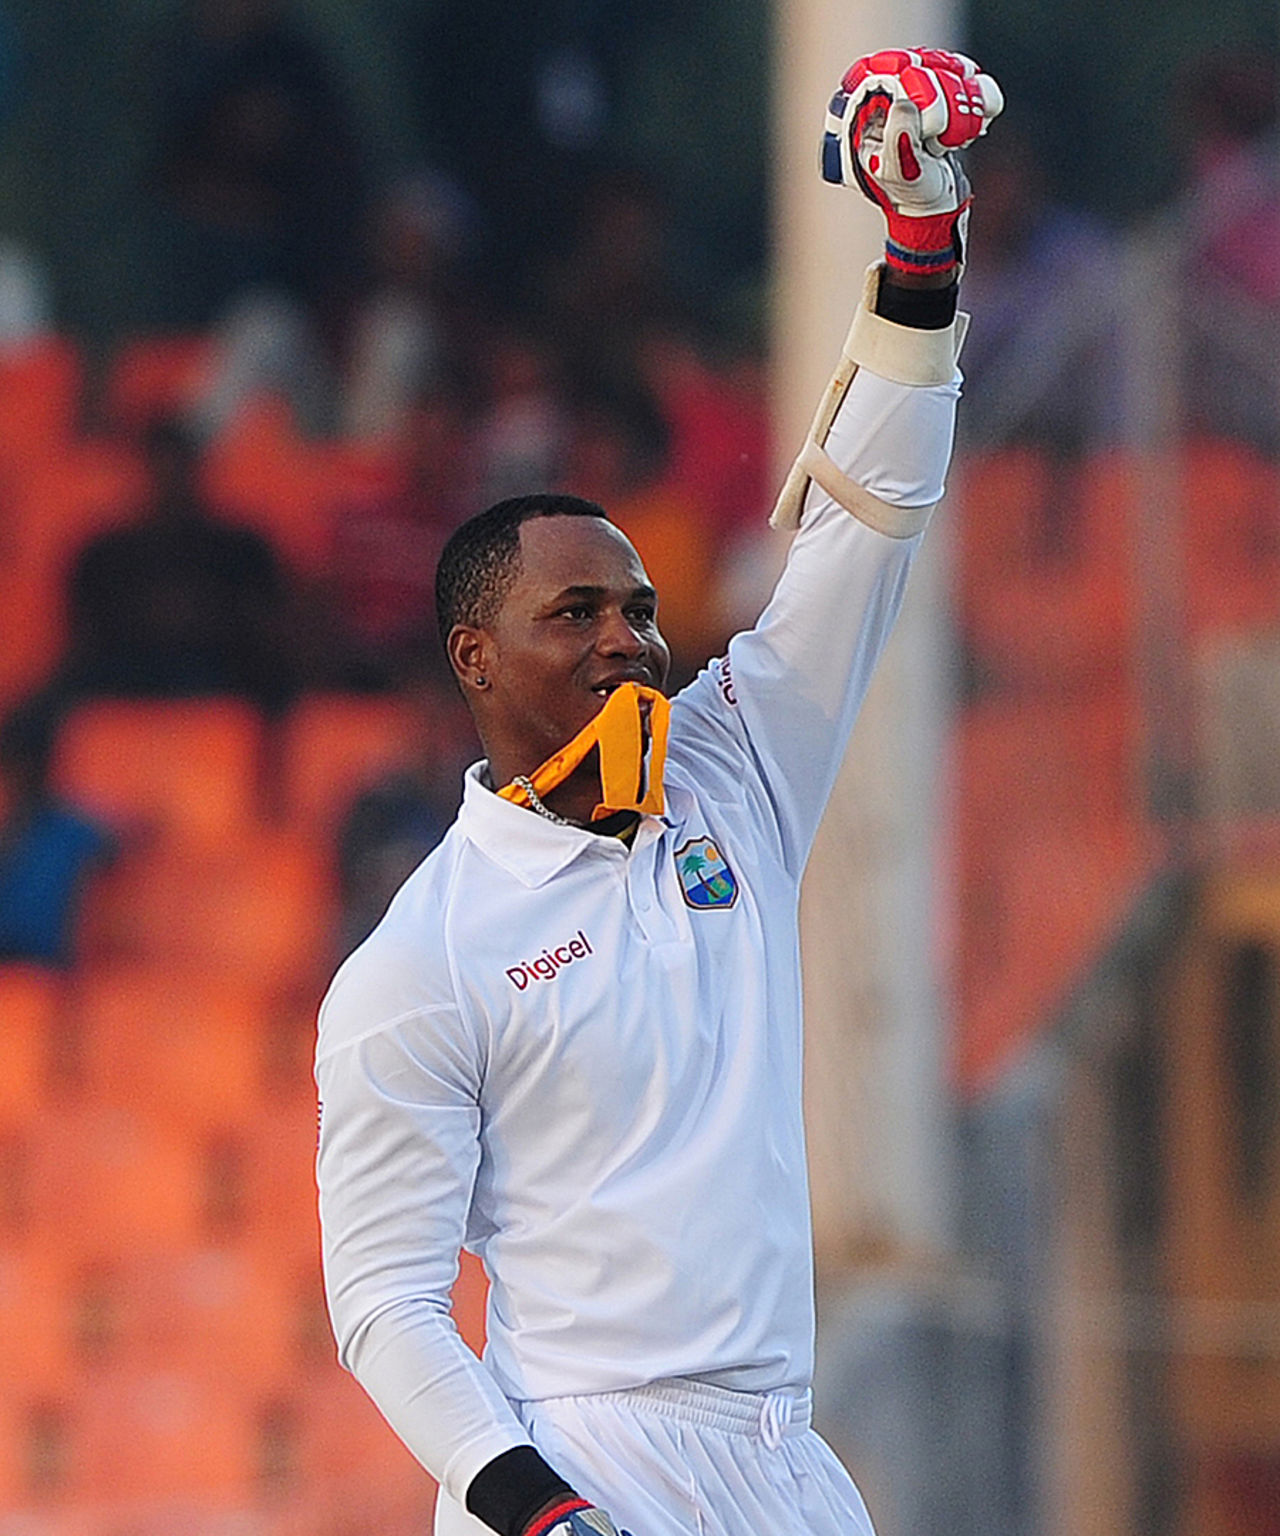 Marlon Samuels takes out his yellow scarf after scoring a century, Bangladesh v West Indies, 2nd Test, Khulna, 2nd day, November 22, 2012